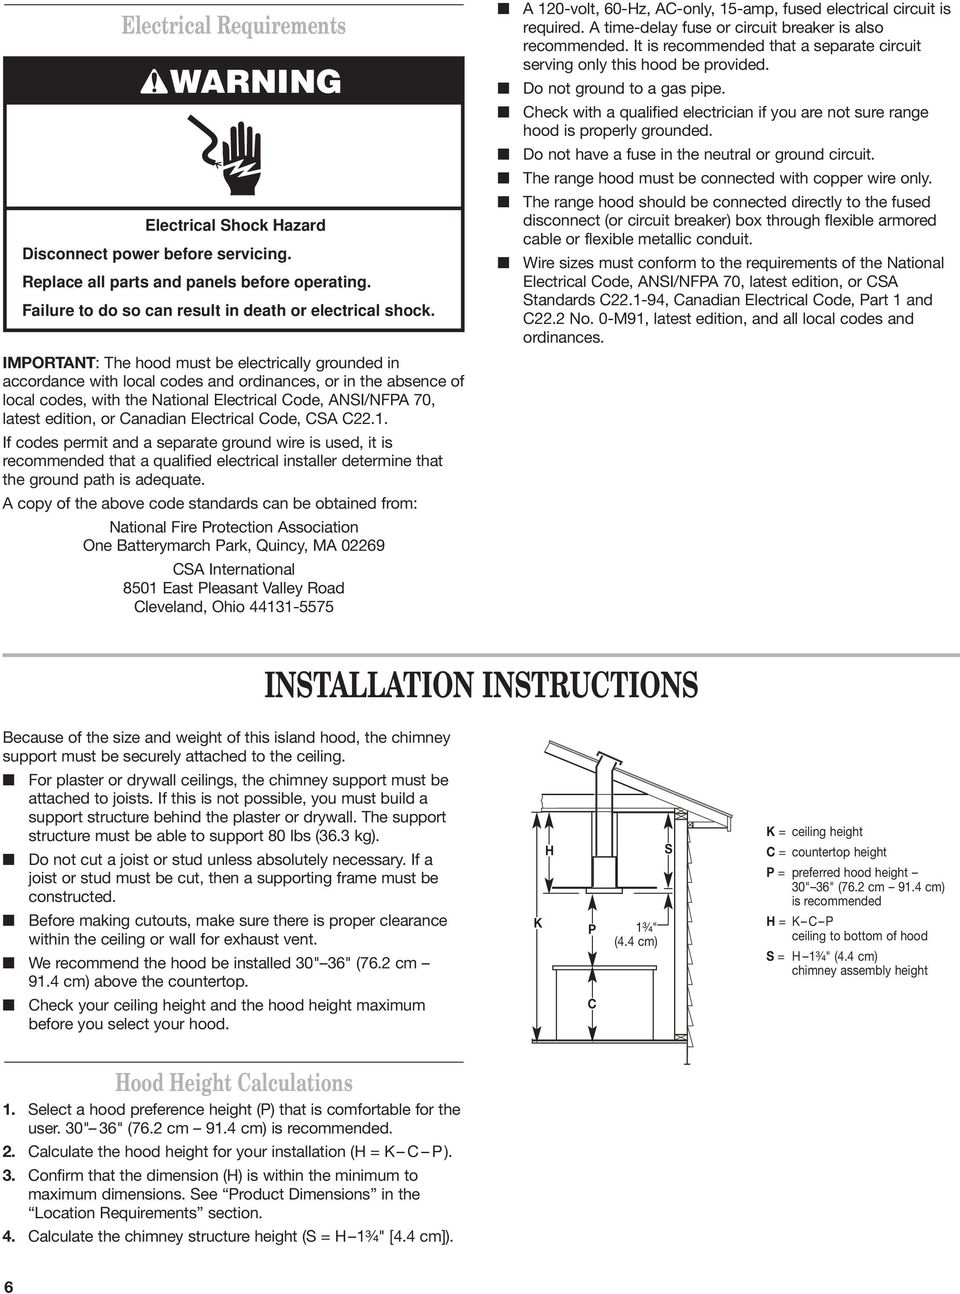 Canadian Electrical Code, CS C22.1. If codes permit and a separate ground wire is used, it is recommended that a qualified electrical installer determine that the ground path is adequate.